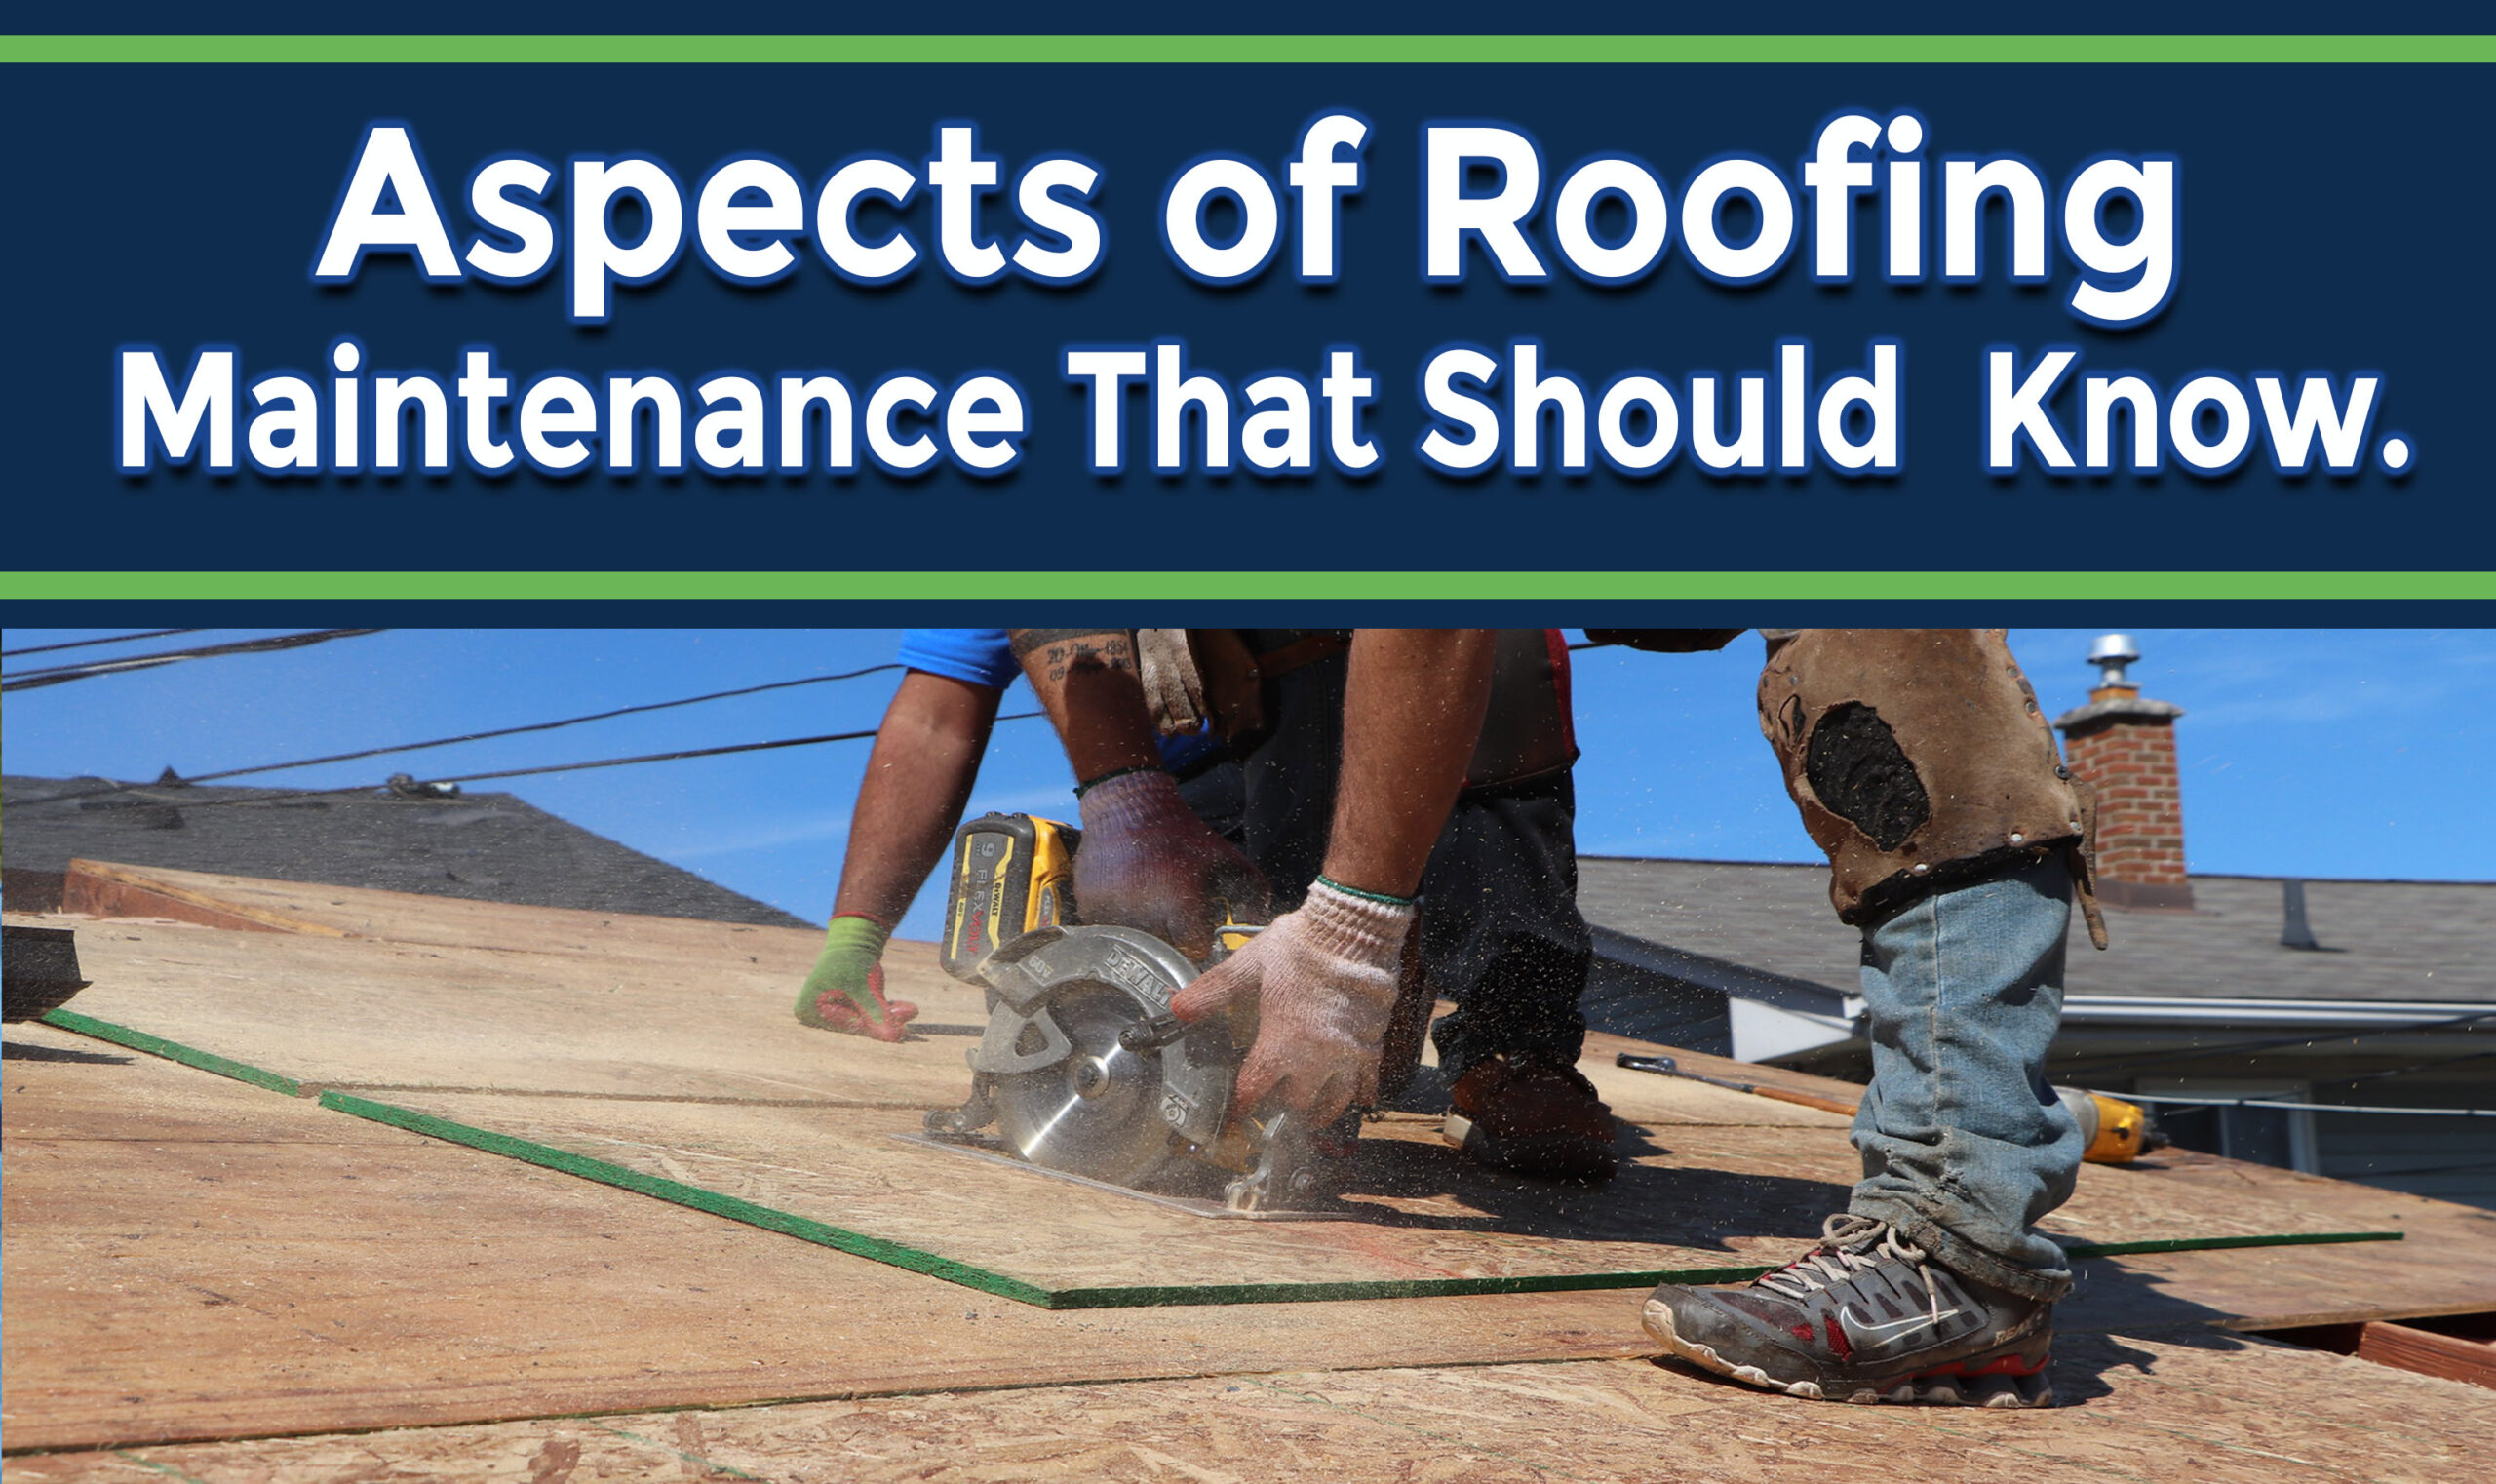 3 Specific Aspects of Roofing Maintenance That Should Not Be Neglected